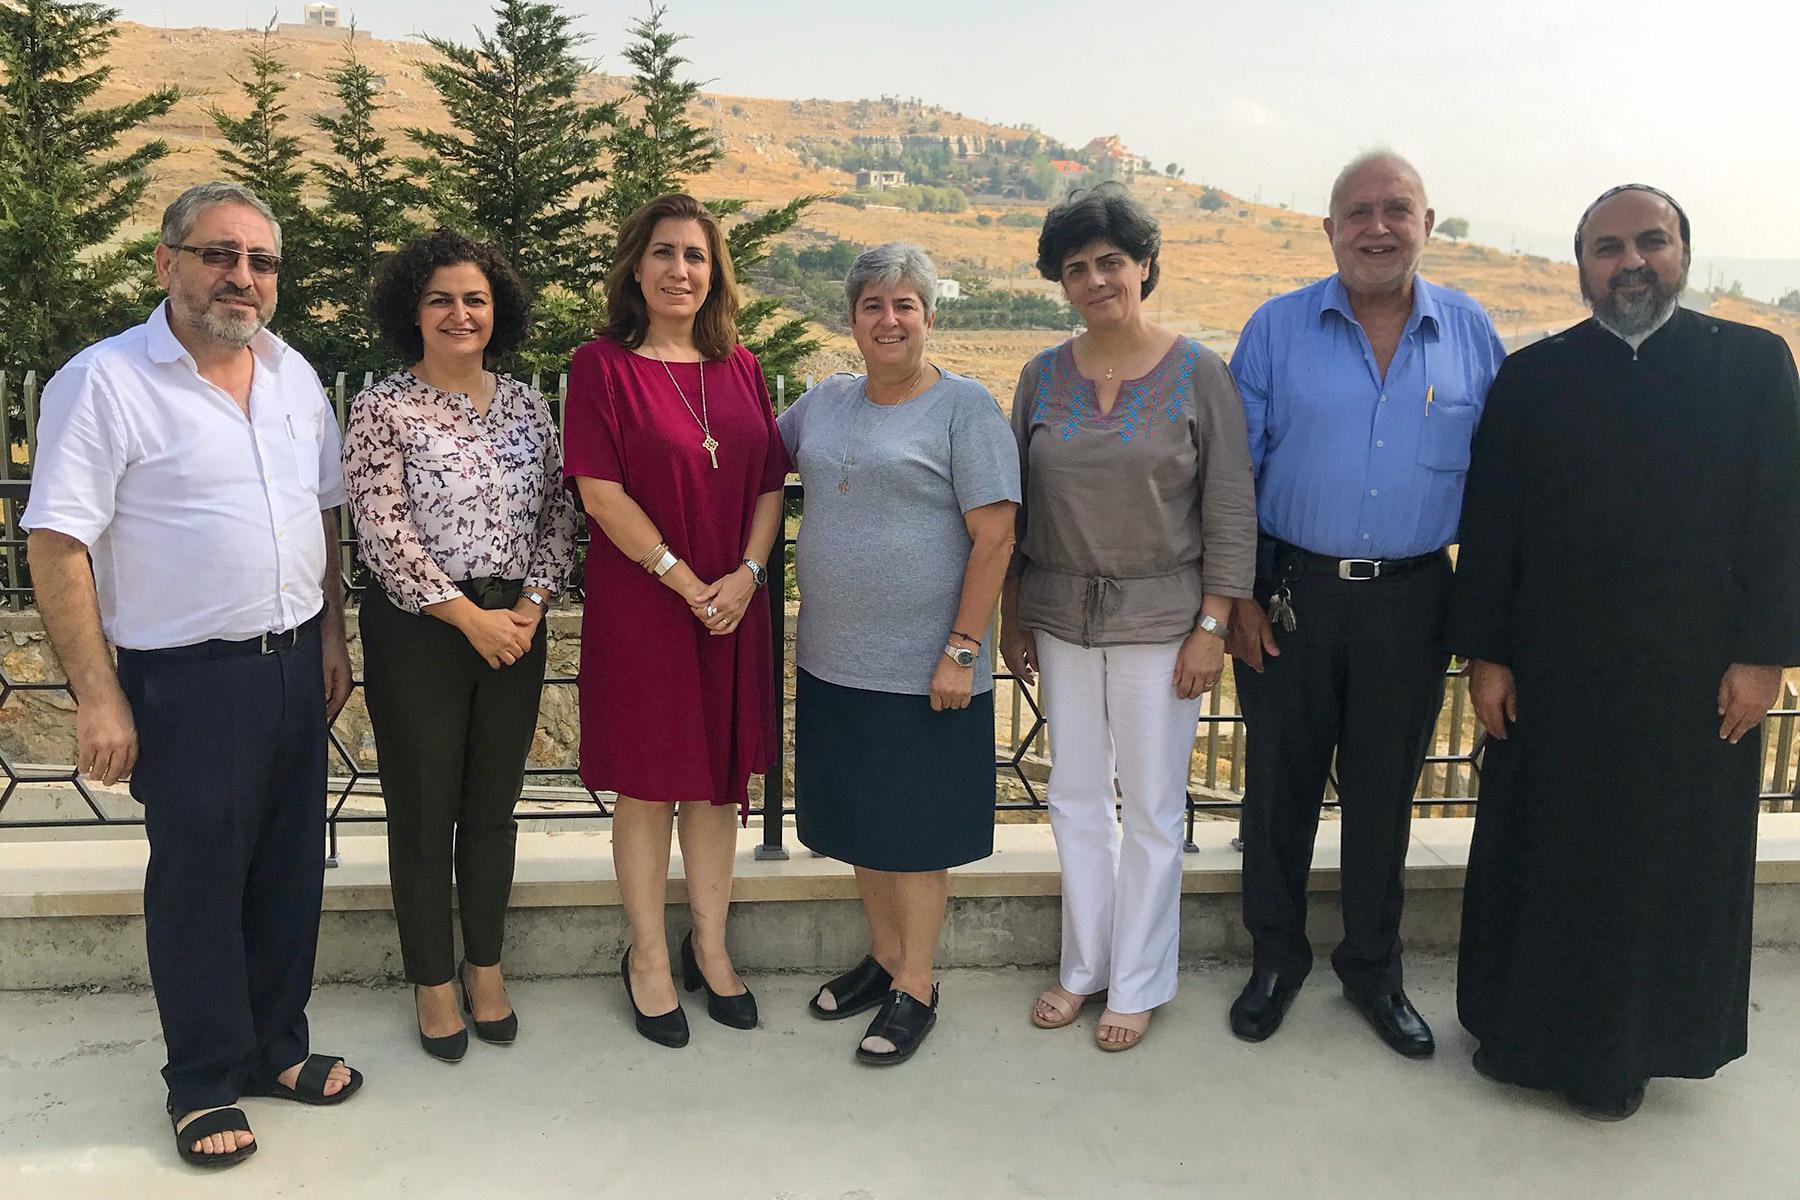 Members of the Middle East Council of Churchesâ commission, including Fr Gaby Hachem (first on left) and Dr Souraya Bechealany (third from right), who drew up the resources for Christian Unity Week. Photo: MECC